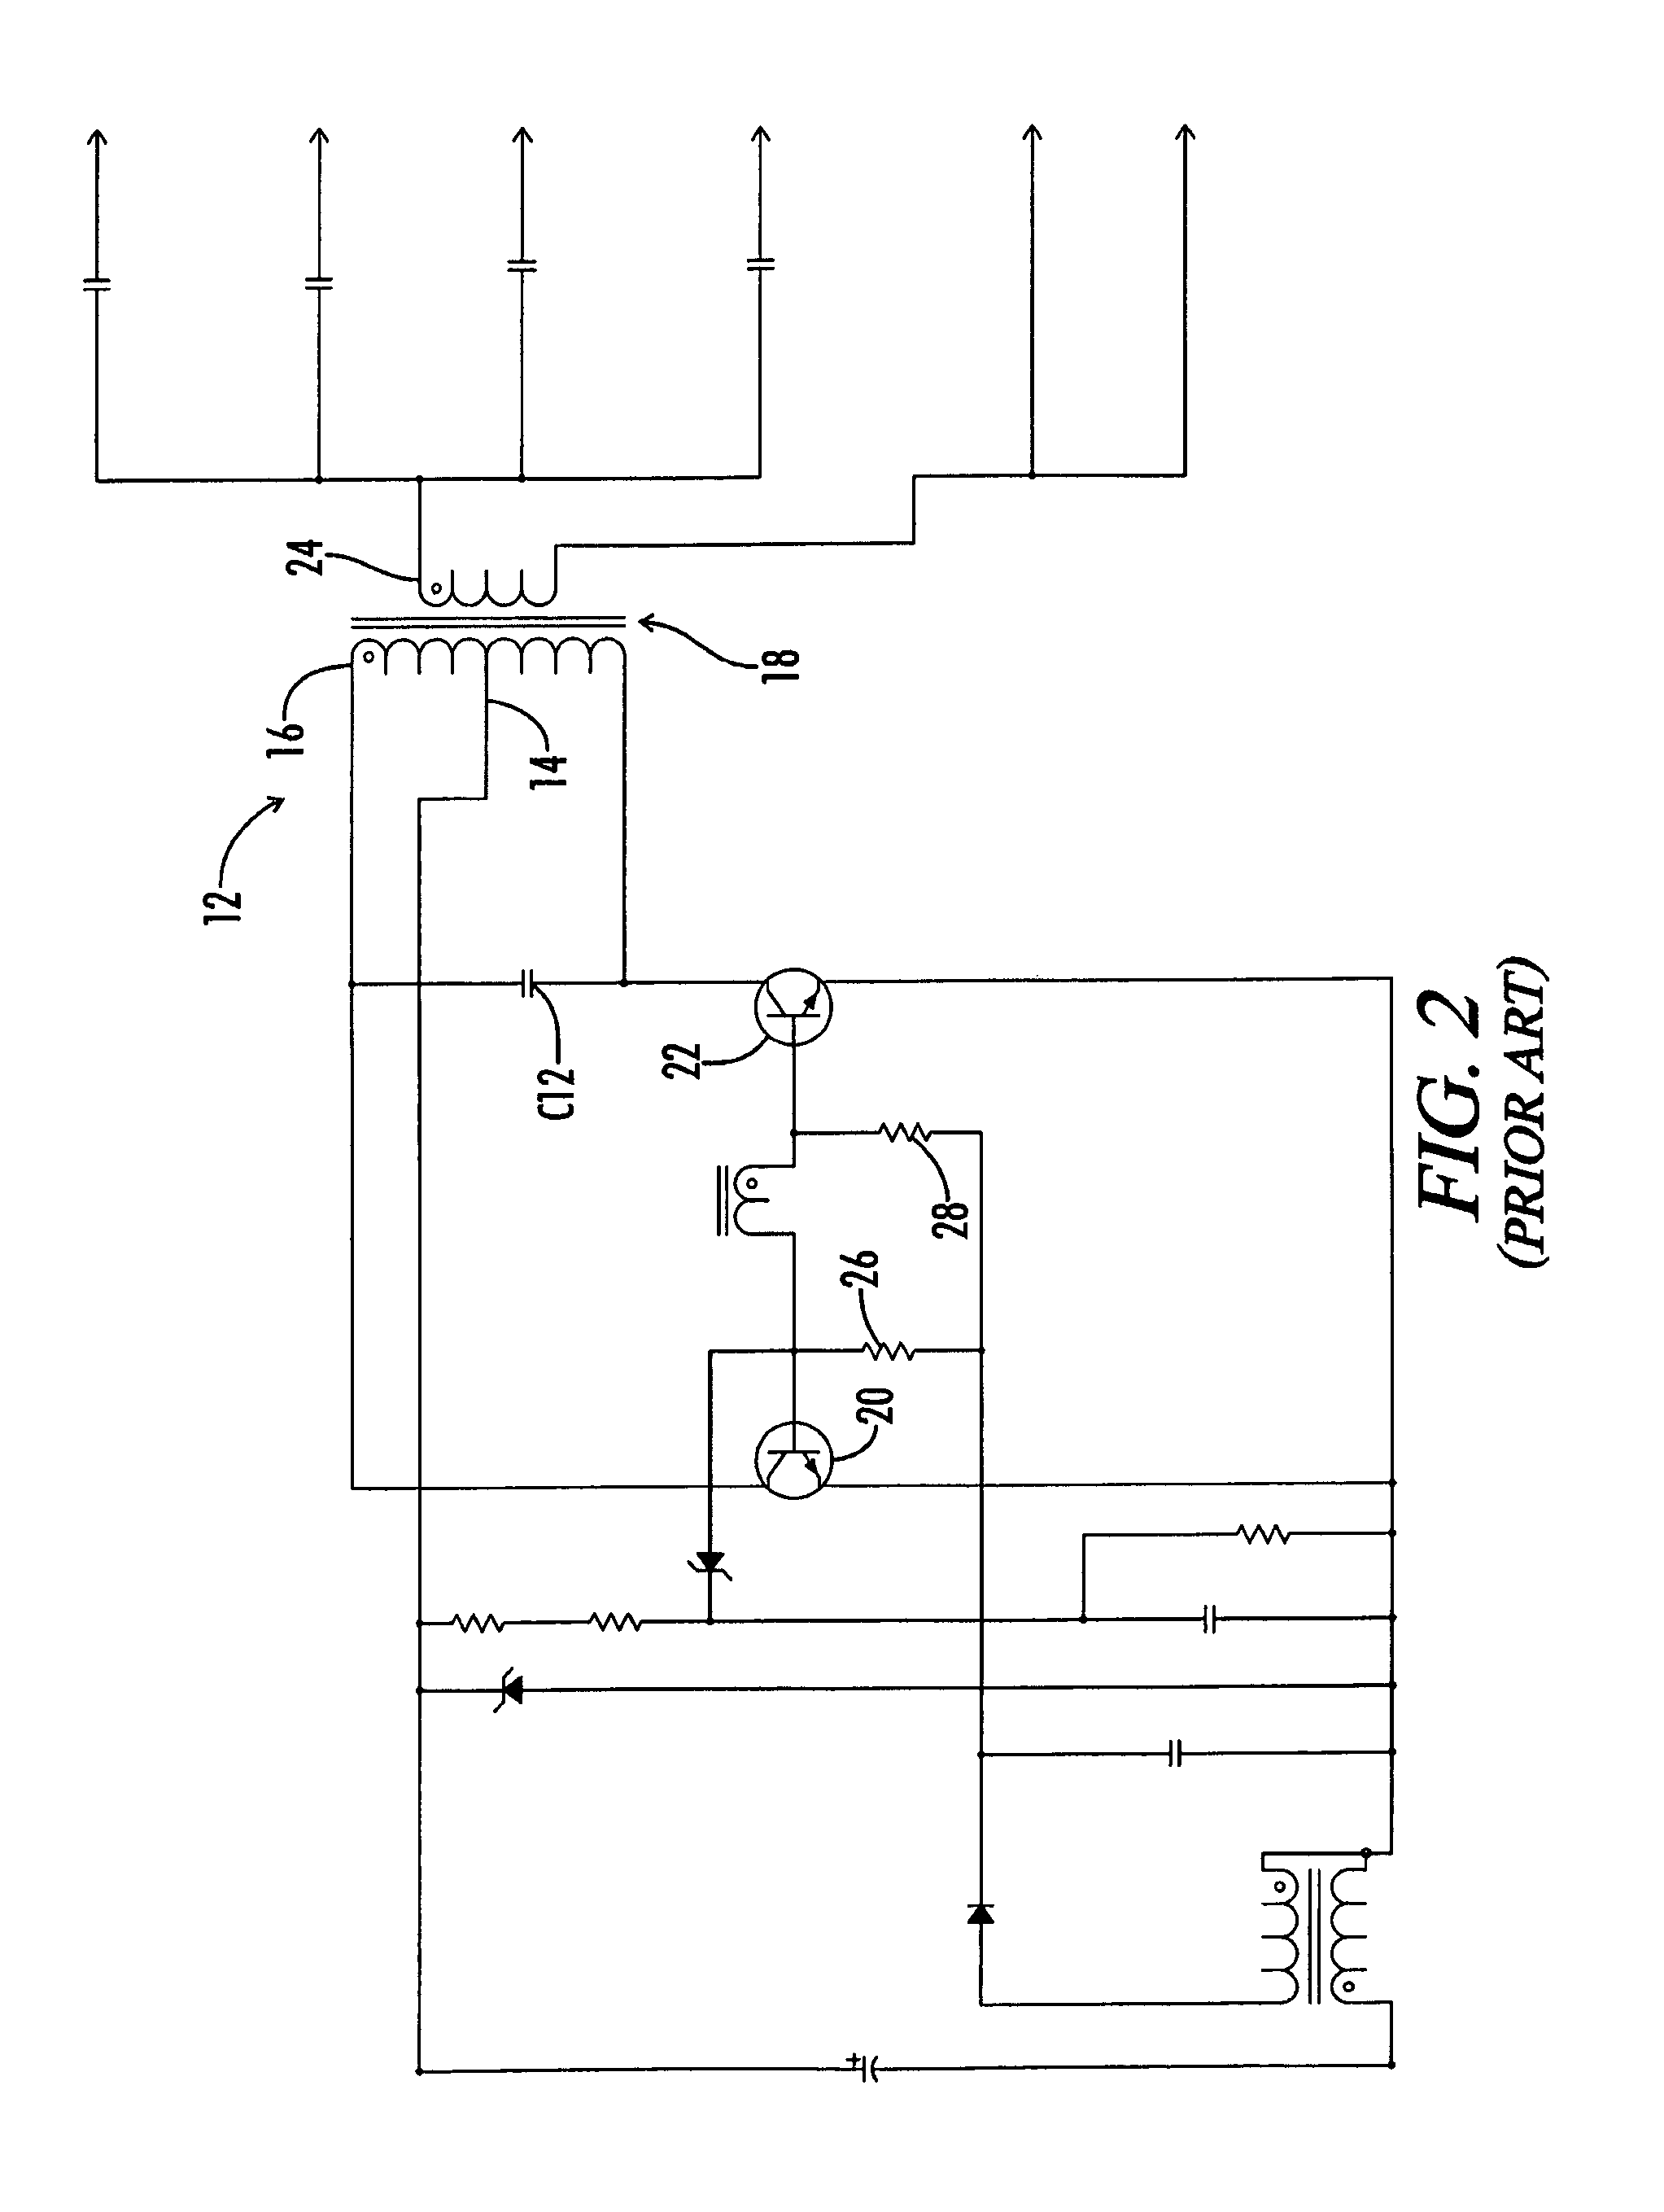 Method for controlling striations in a lamp powered by an electronic ballast